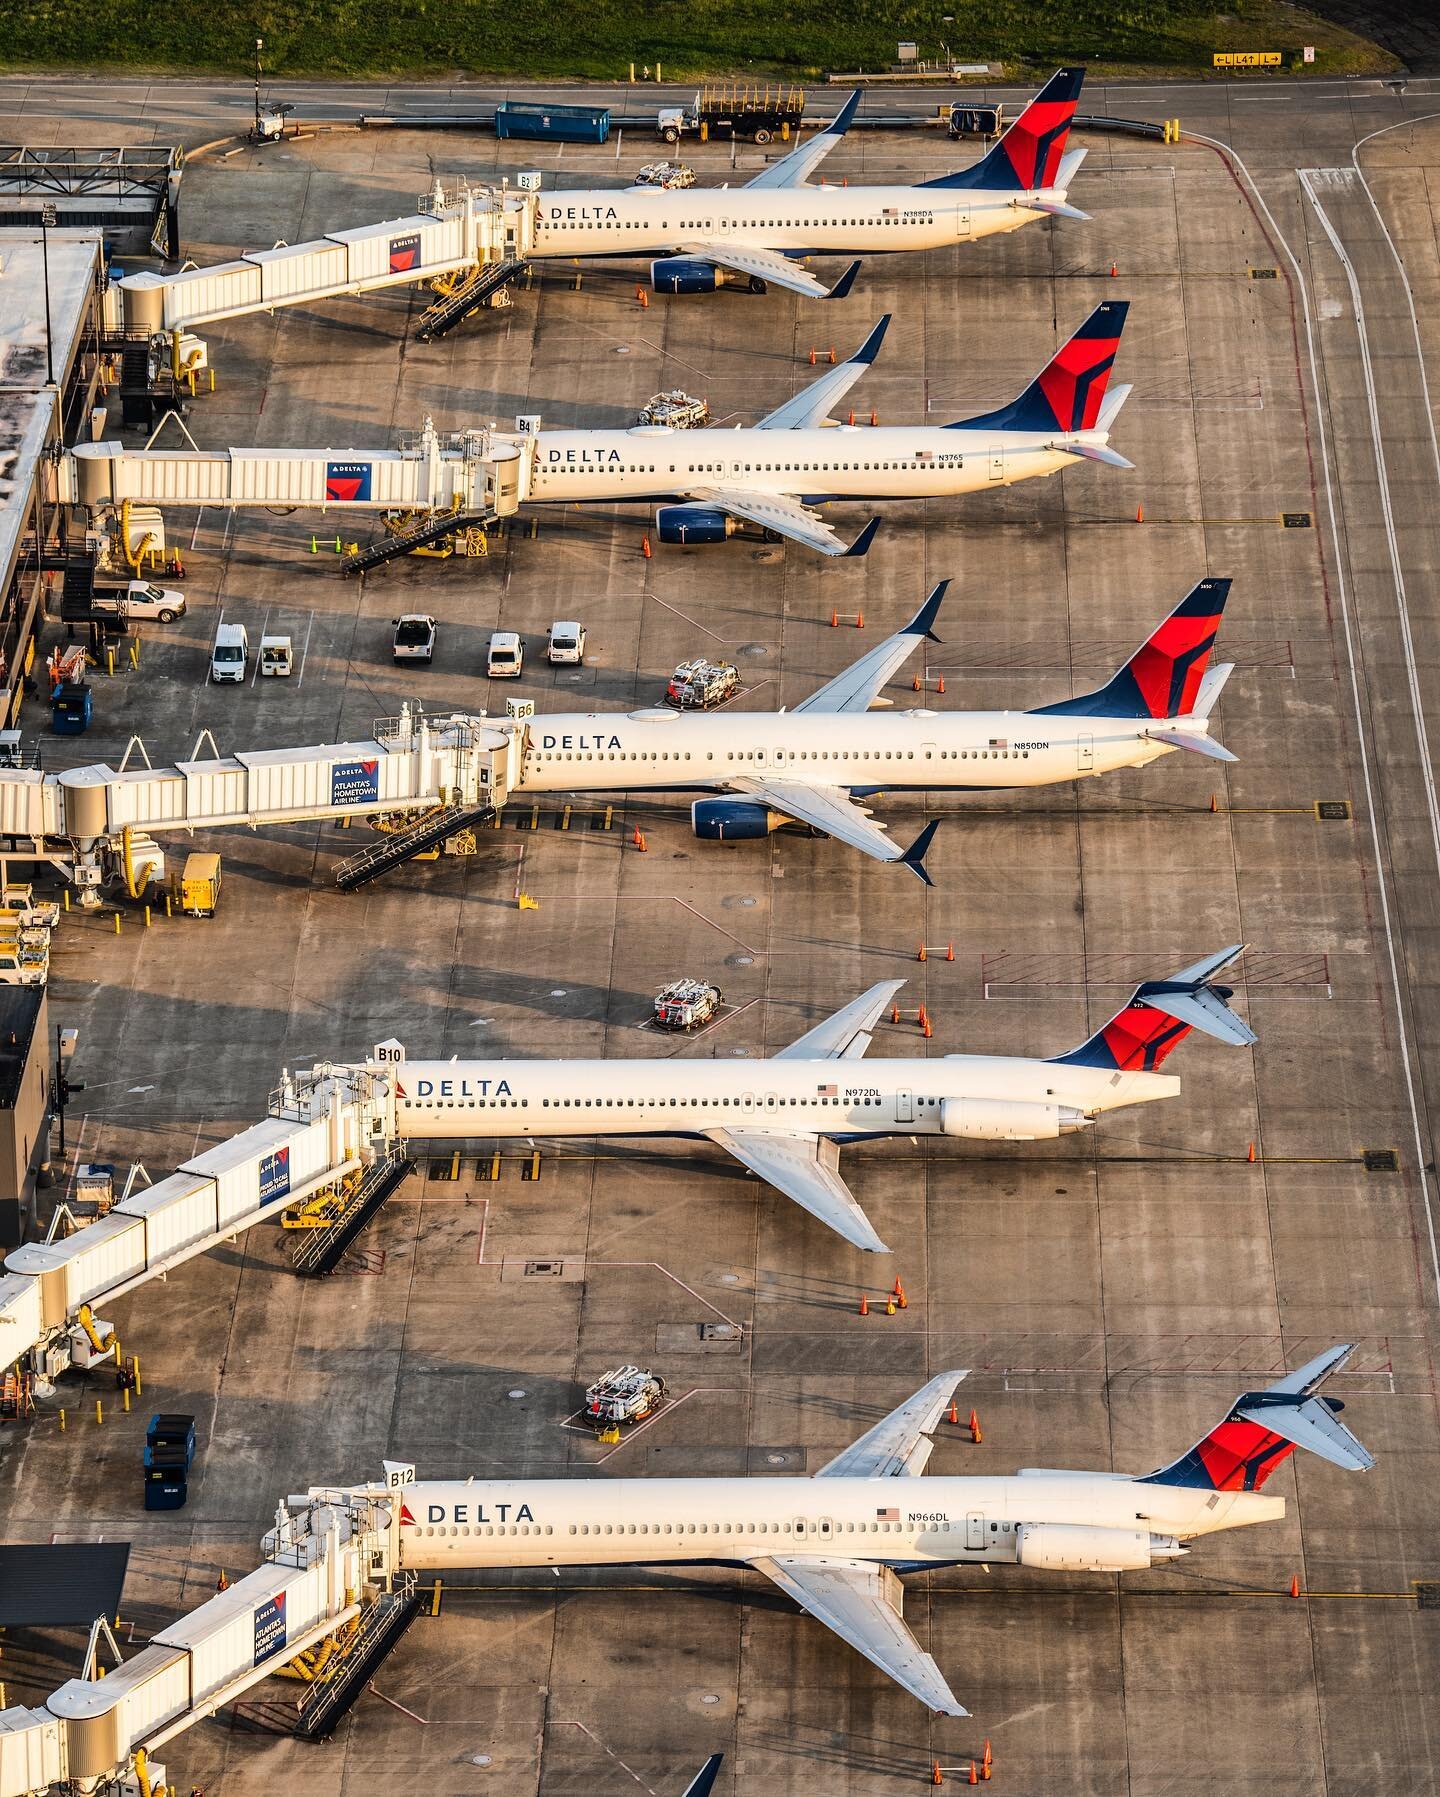 Missing the days the T-Tails still roamed free... #deltaairlines #delta #boeing #atl #atlairport #atlanta #atlantaphotographer #instagramaviation #aviation #aviationphoto #aviationphotography #nikon #nikonphoto #d850 #aerialphotography #a2a #airbuslo